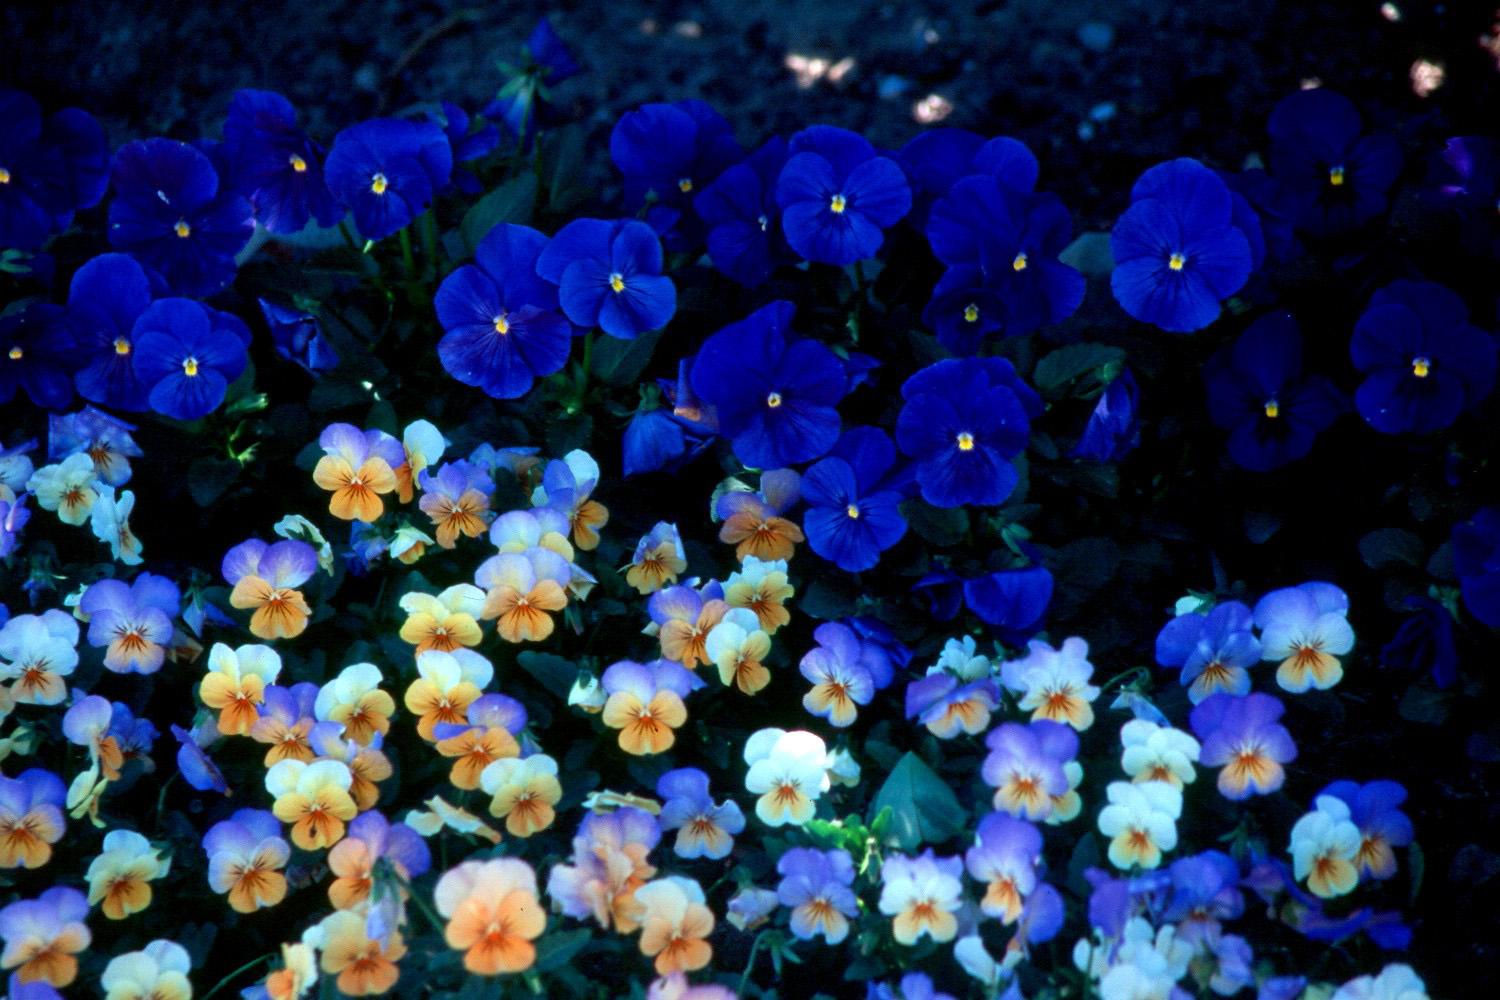 Peach Frost violas from the Sorbet series offer a wide range of colors beginning with blue and moving toward a center of creamy yellow with a splash of hot orange. They are spectacular in this bed with True Blue Panolas.